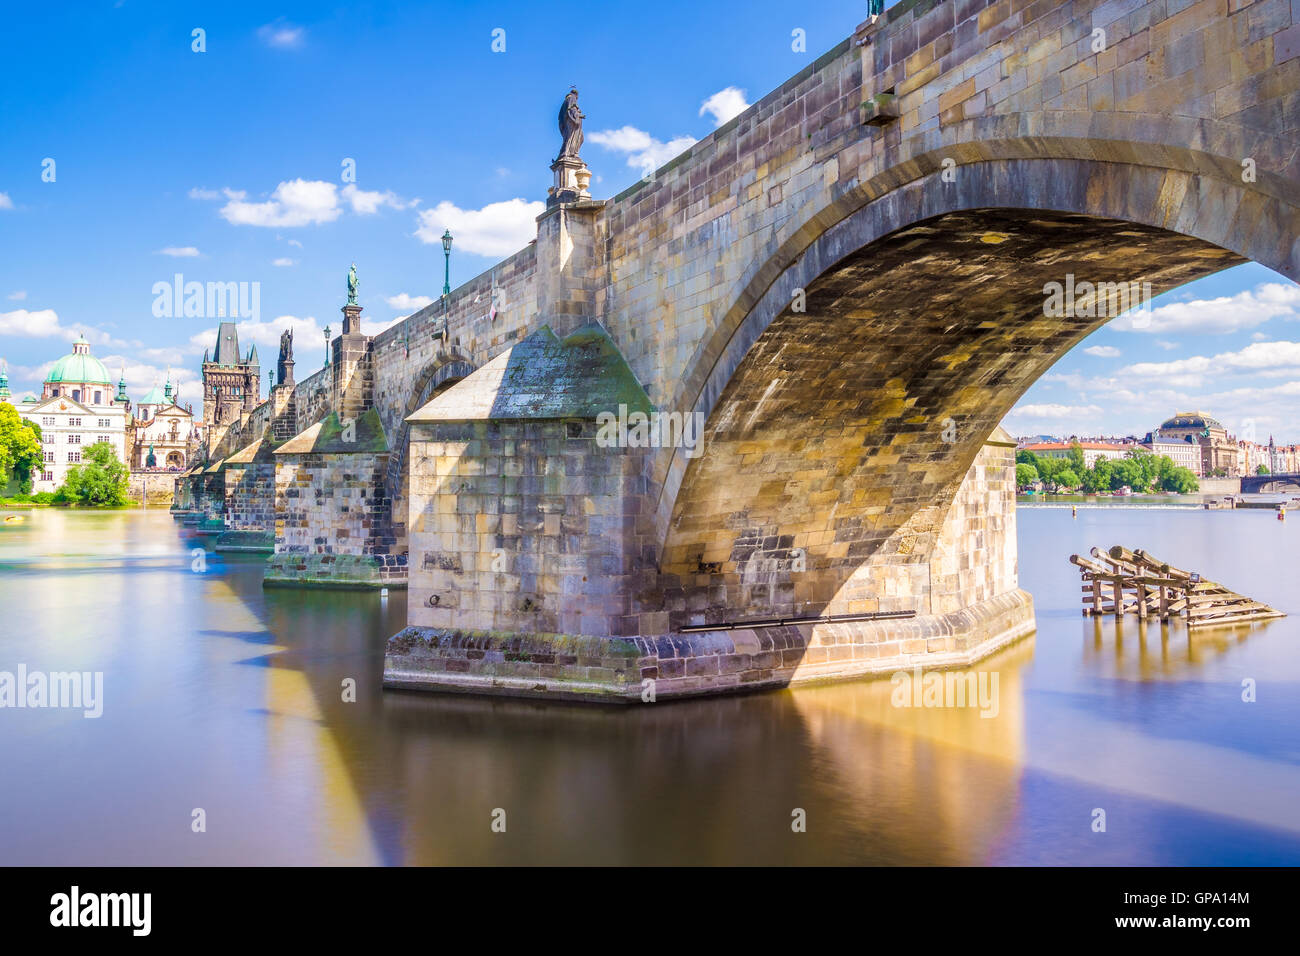 The Charles bridge is located in Prague, Czech Republic. Finished in the XV century, it is a medieval gothic bridge crossing the Stock Photo